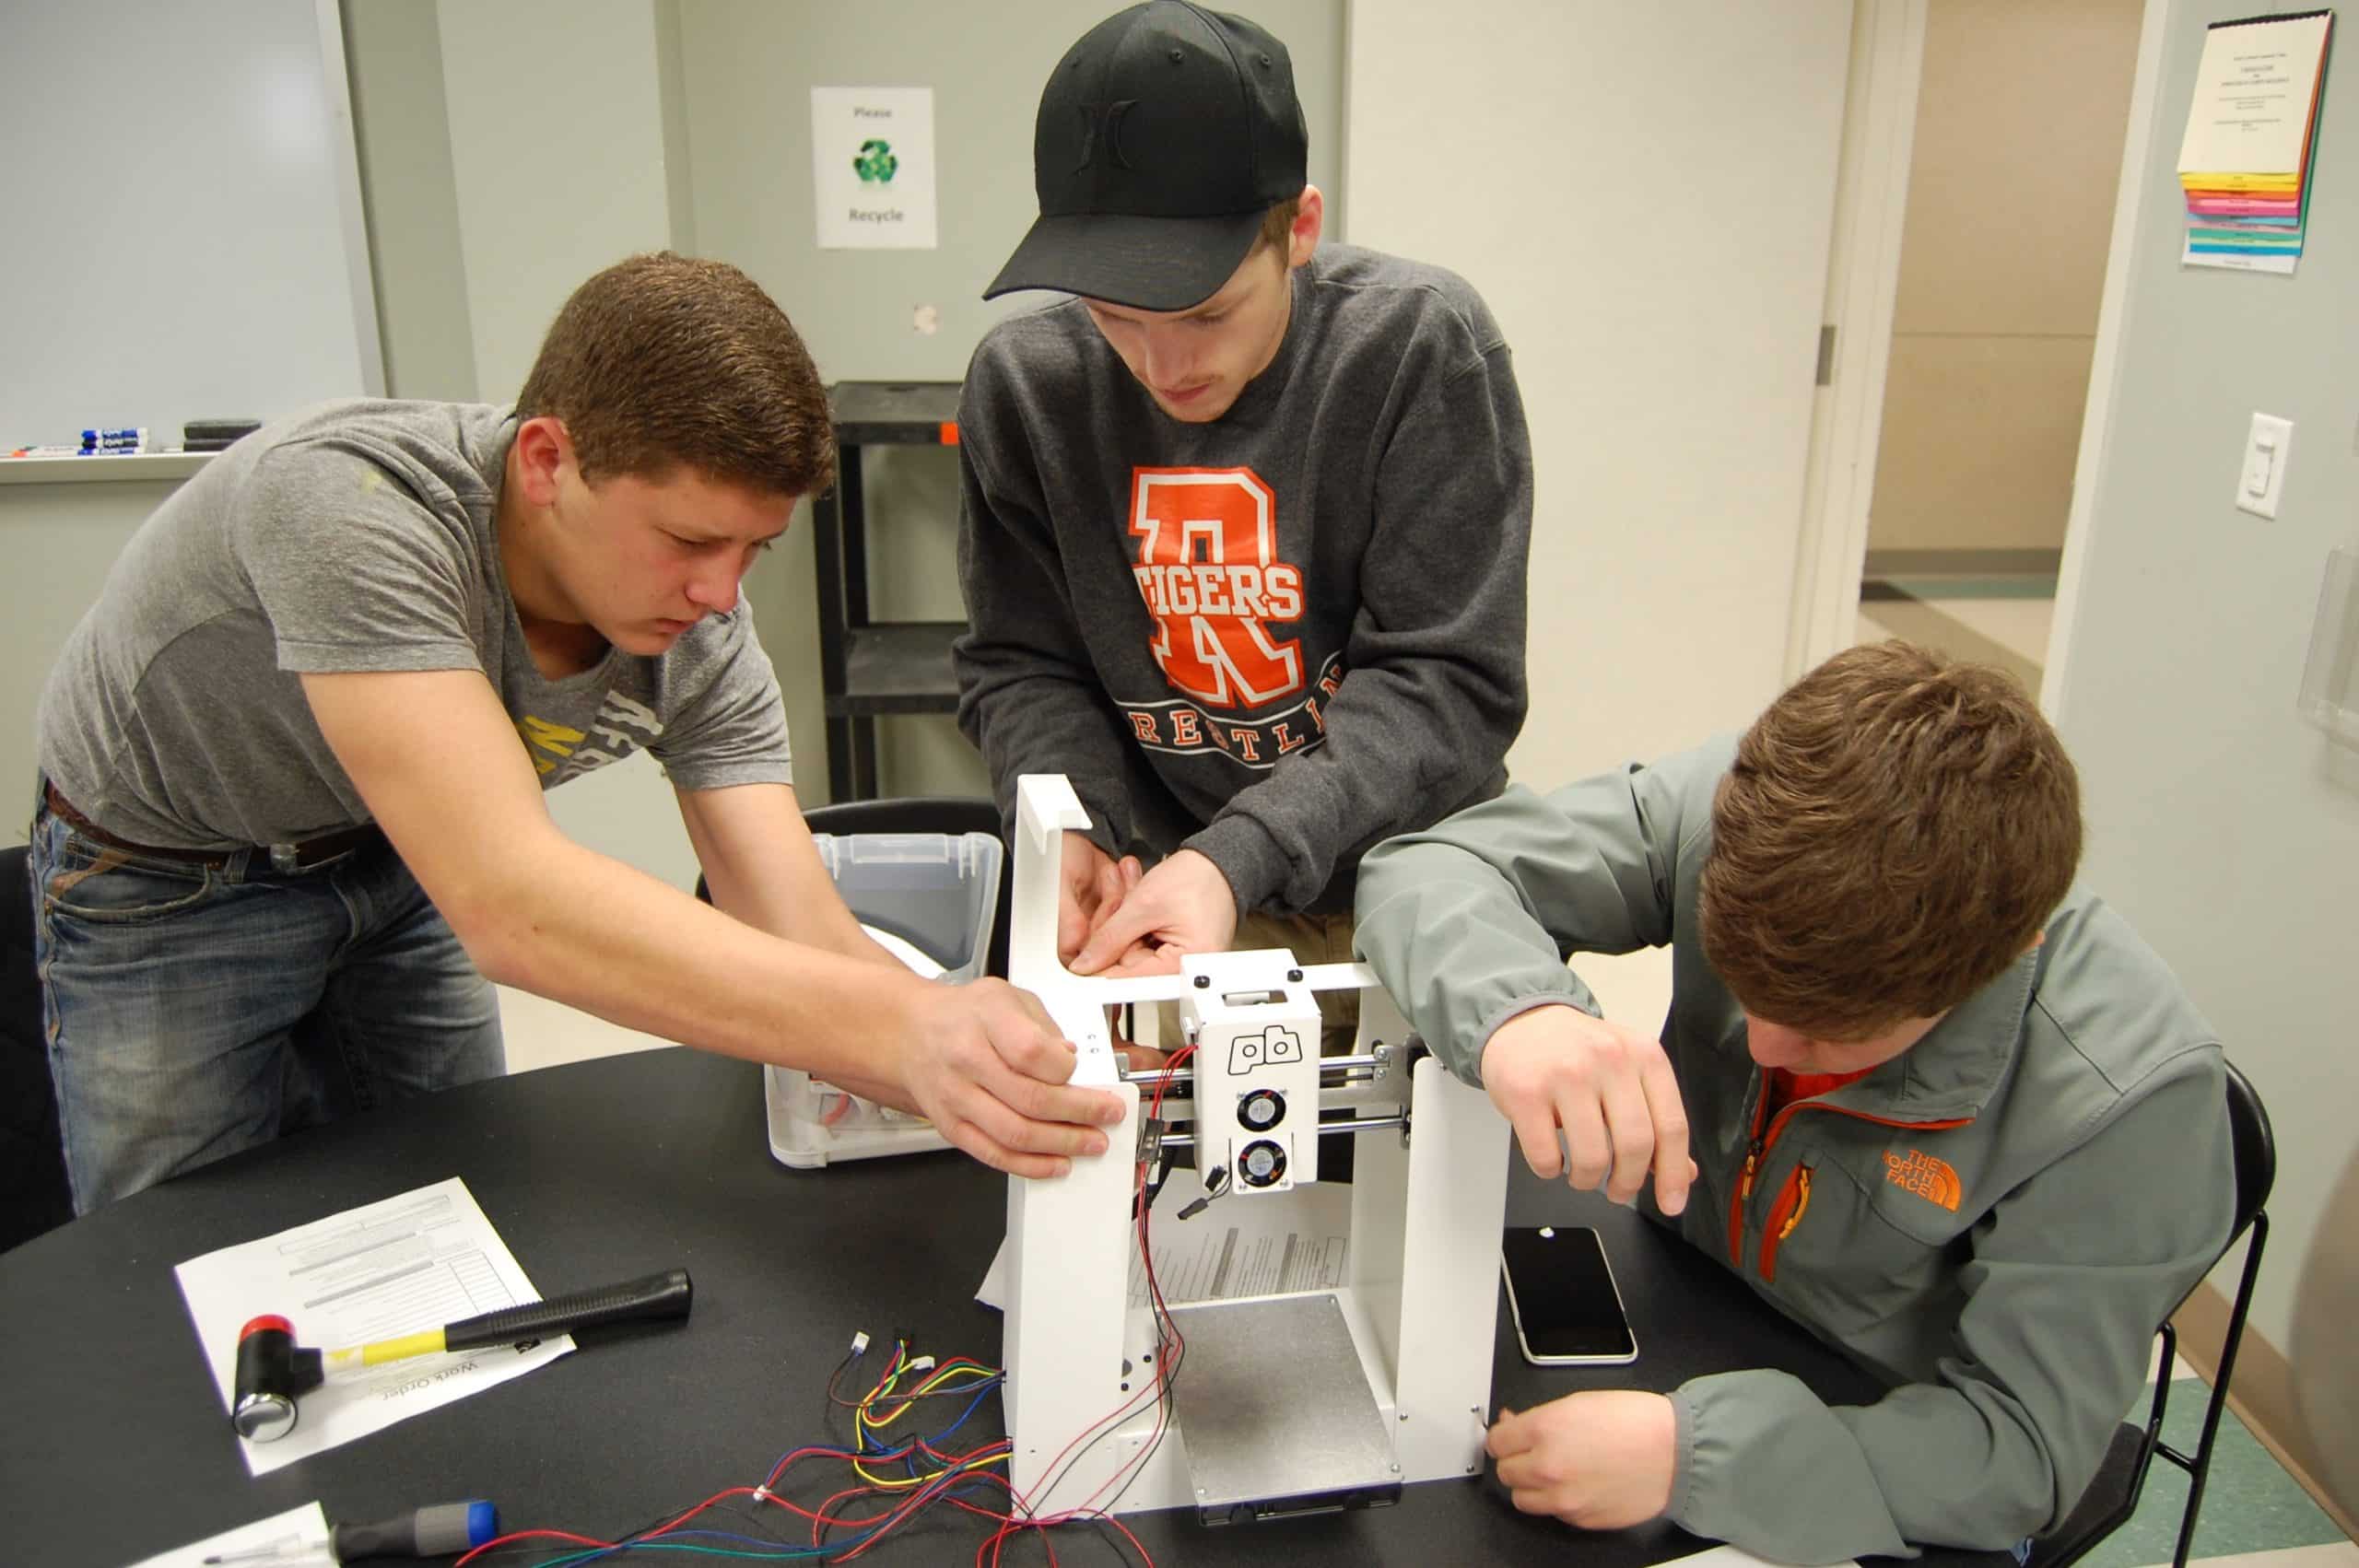 Students get handson experience assembling 3D printers